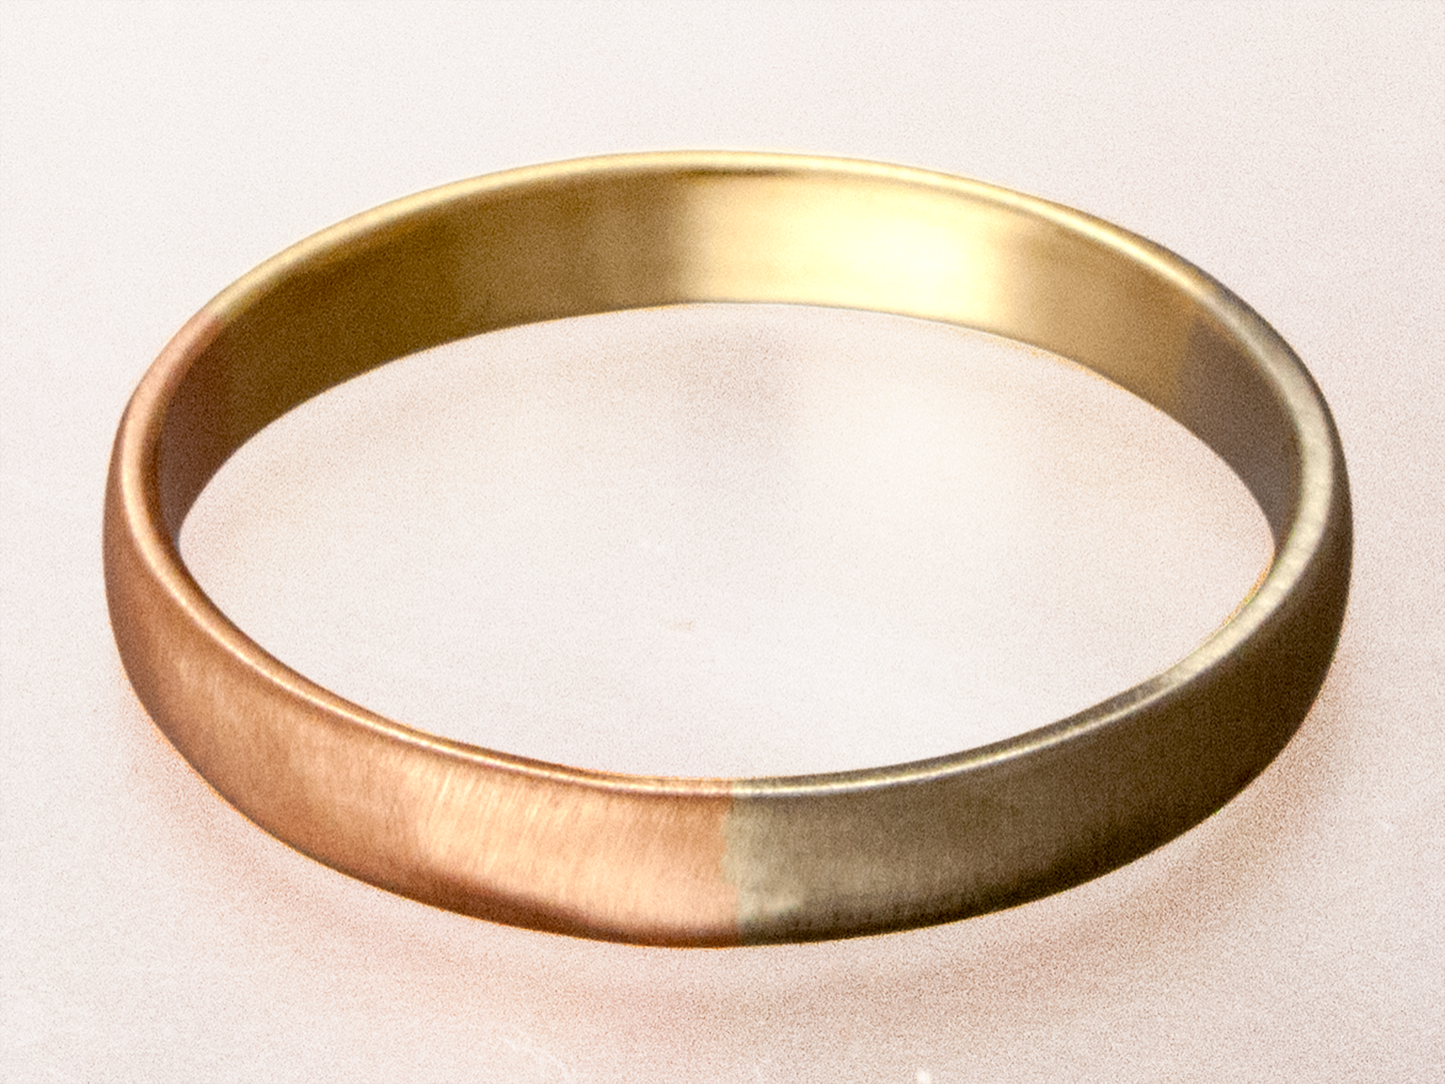 Mixed 14k Gold Wide Low Domed Wedding Band or Anniversary Ring in Yellow, White and Rose Gold, Past Present and Future